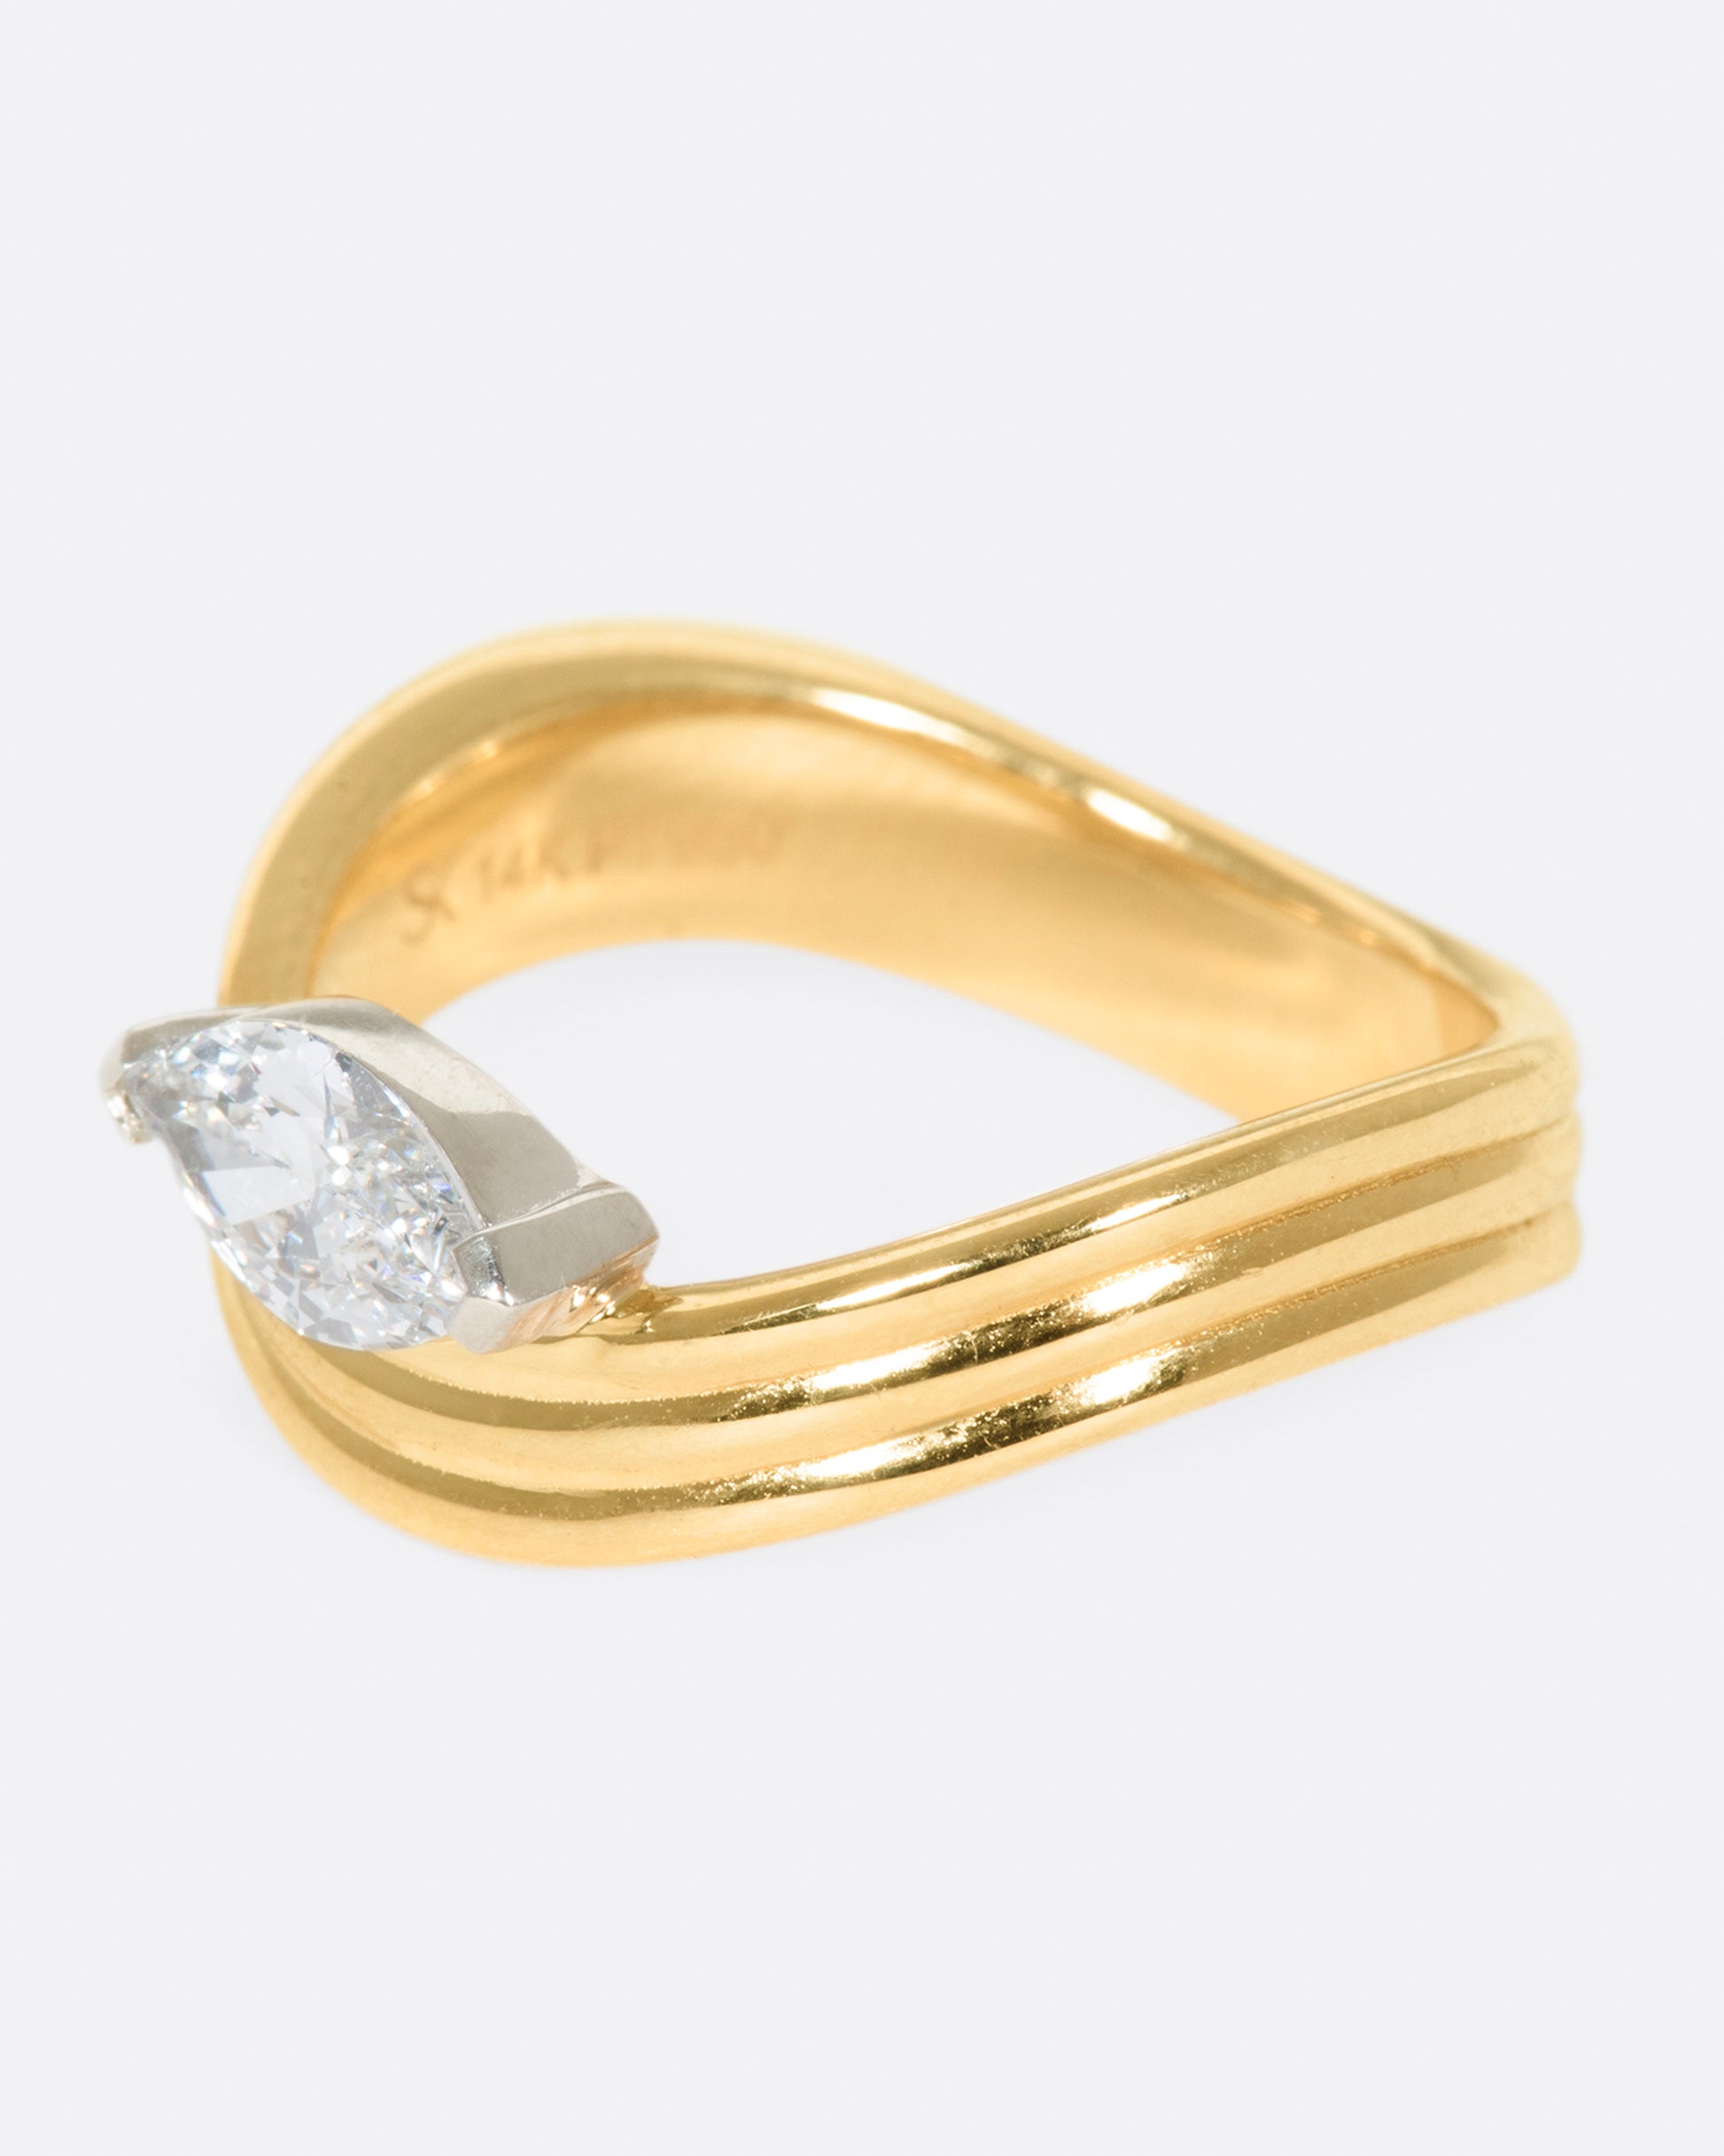 A marquise diamond is nestled into the curve of this banded ring, which sits comfortably around the base of the finger.